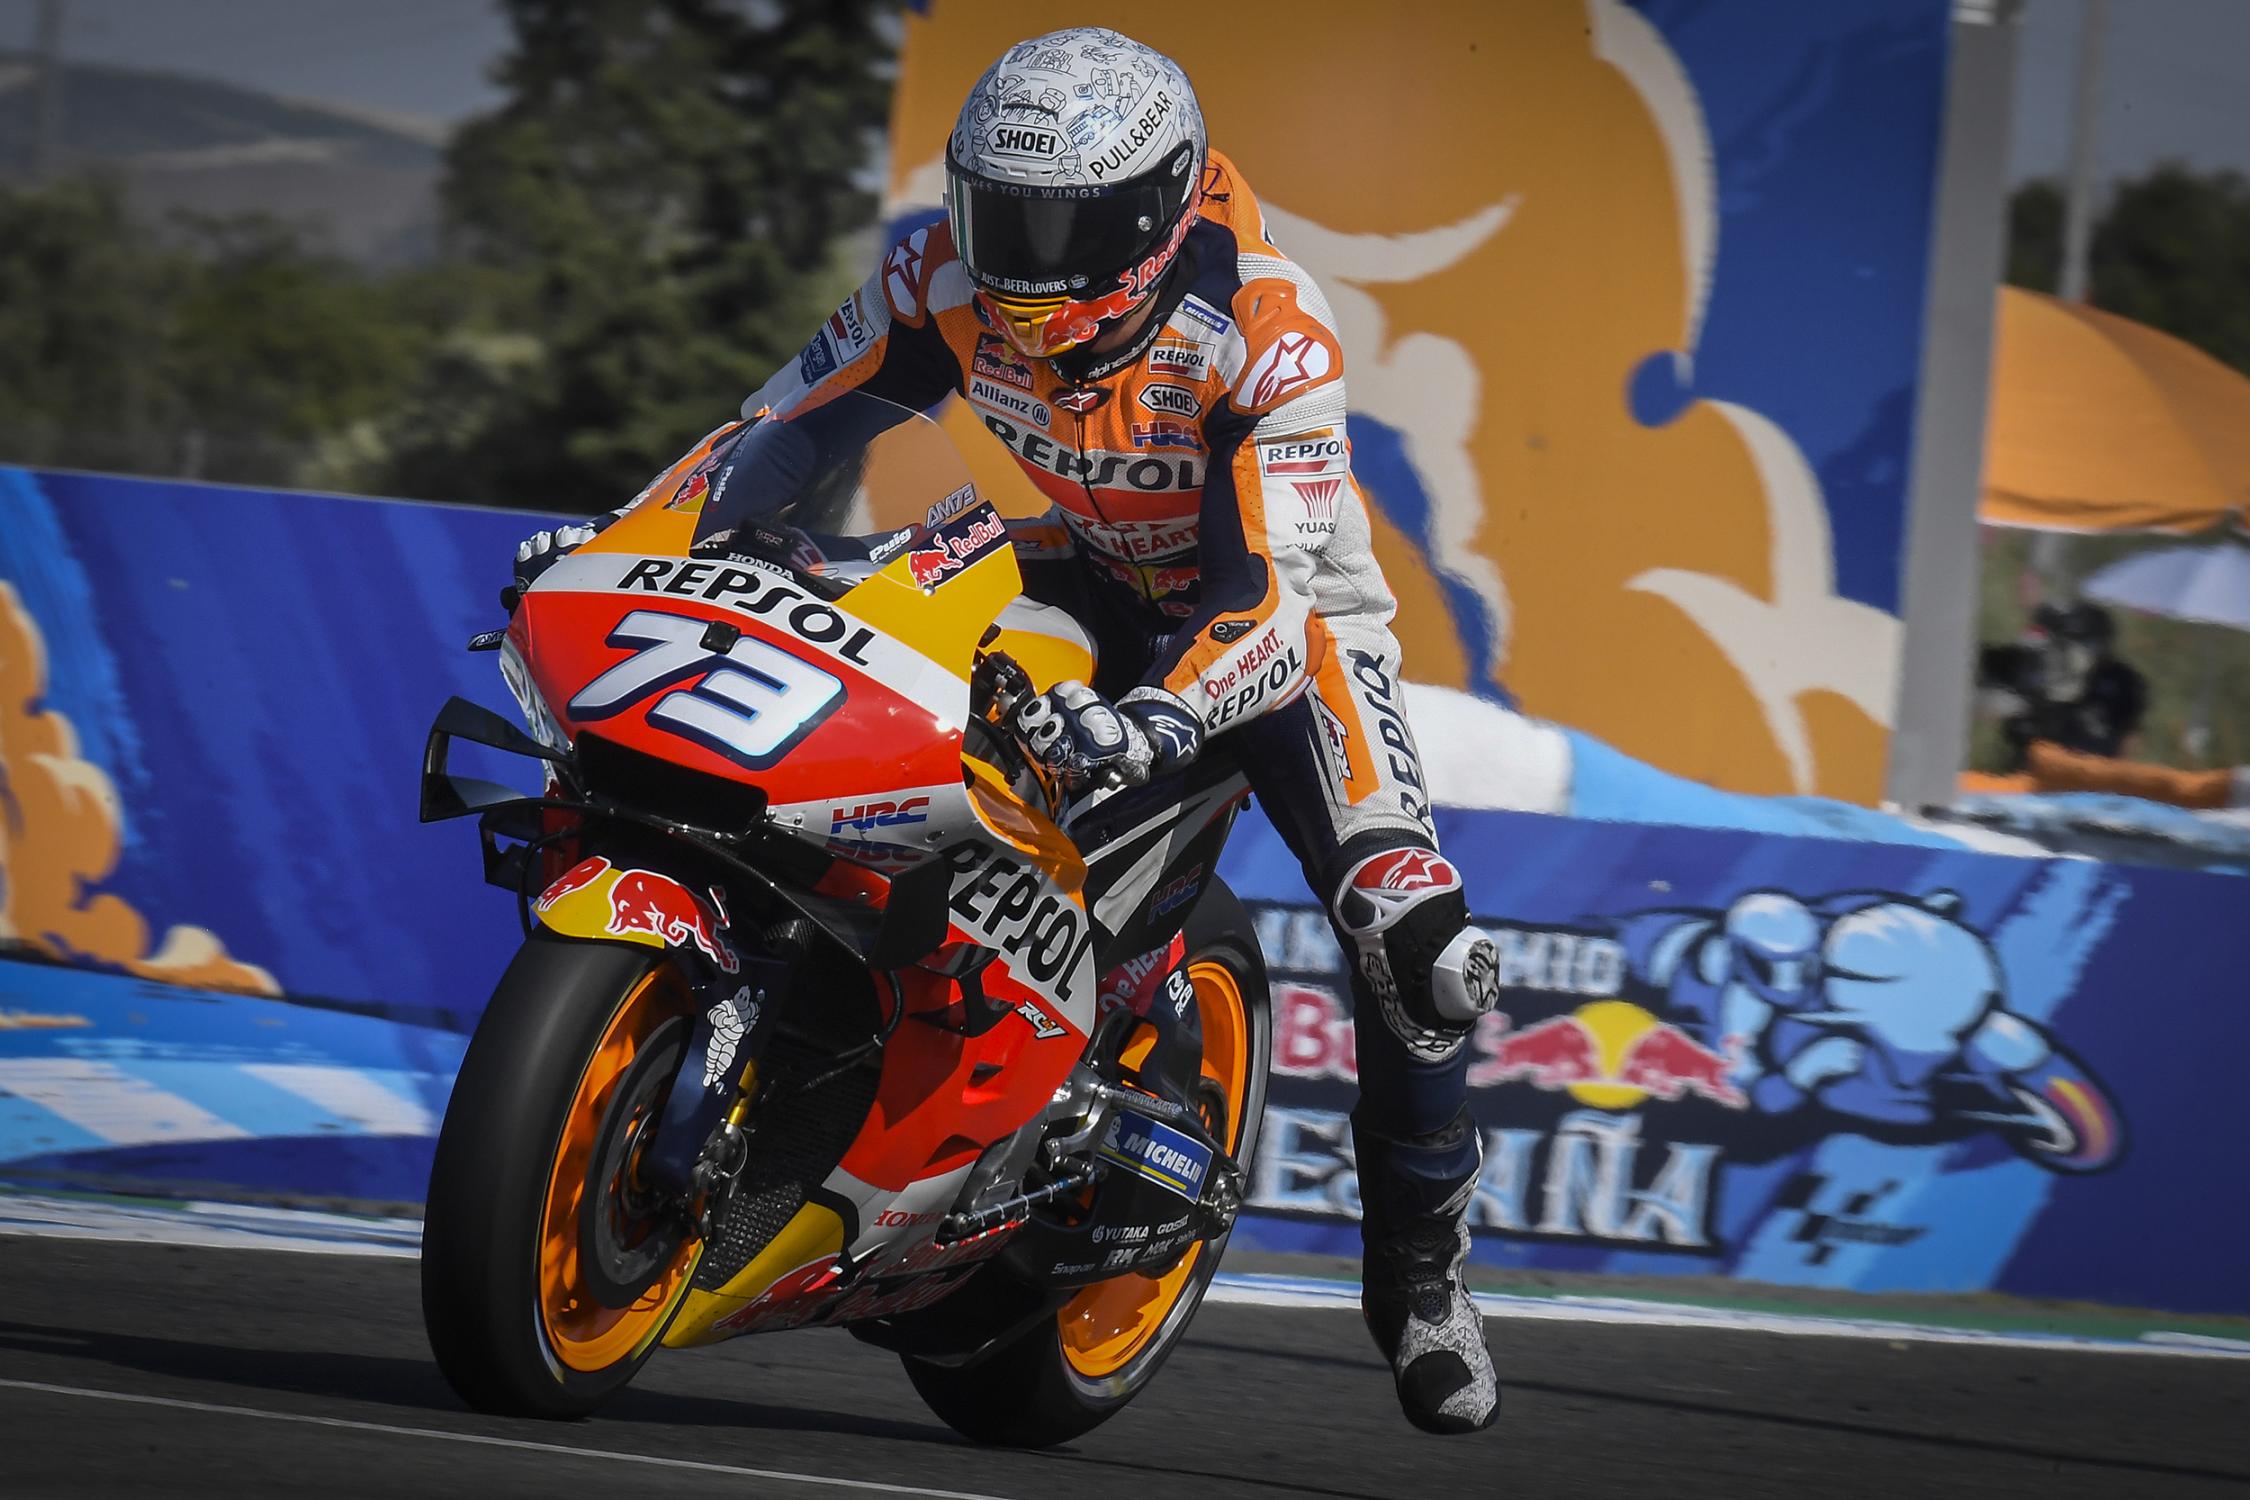 MotoGP 2020: Results of the second phase (sherry)